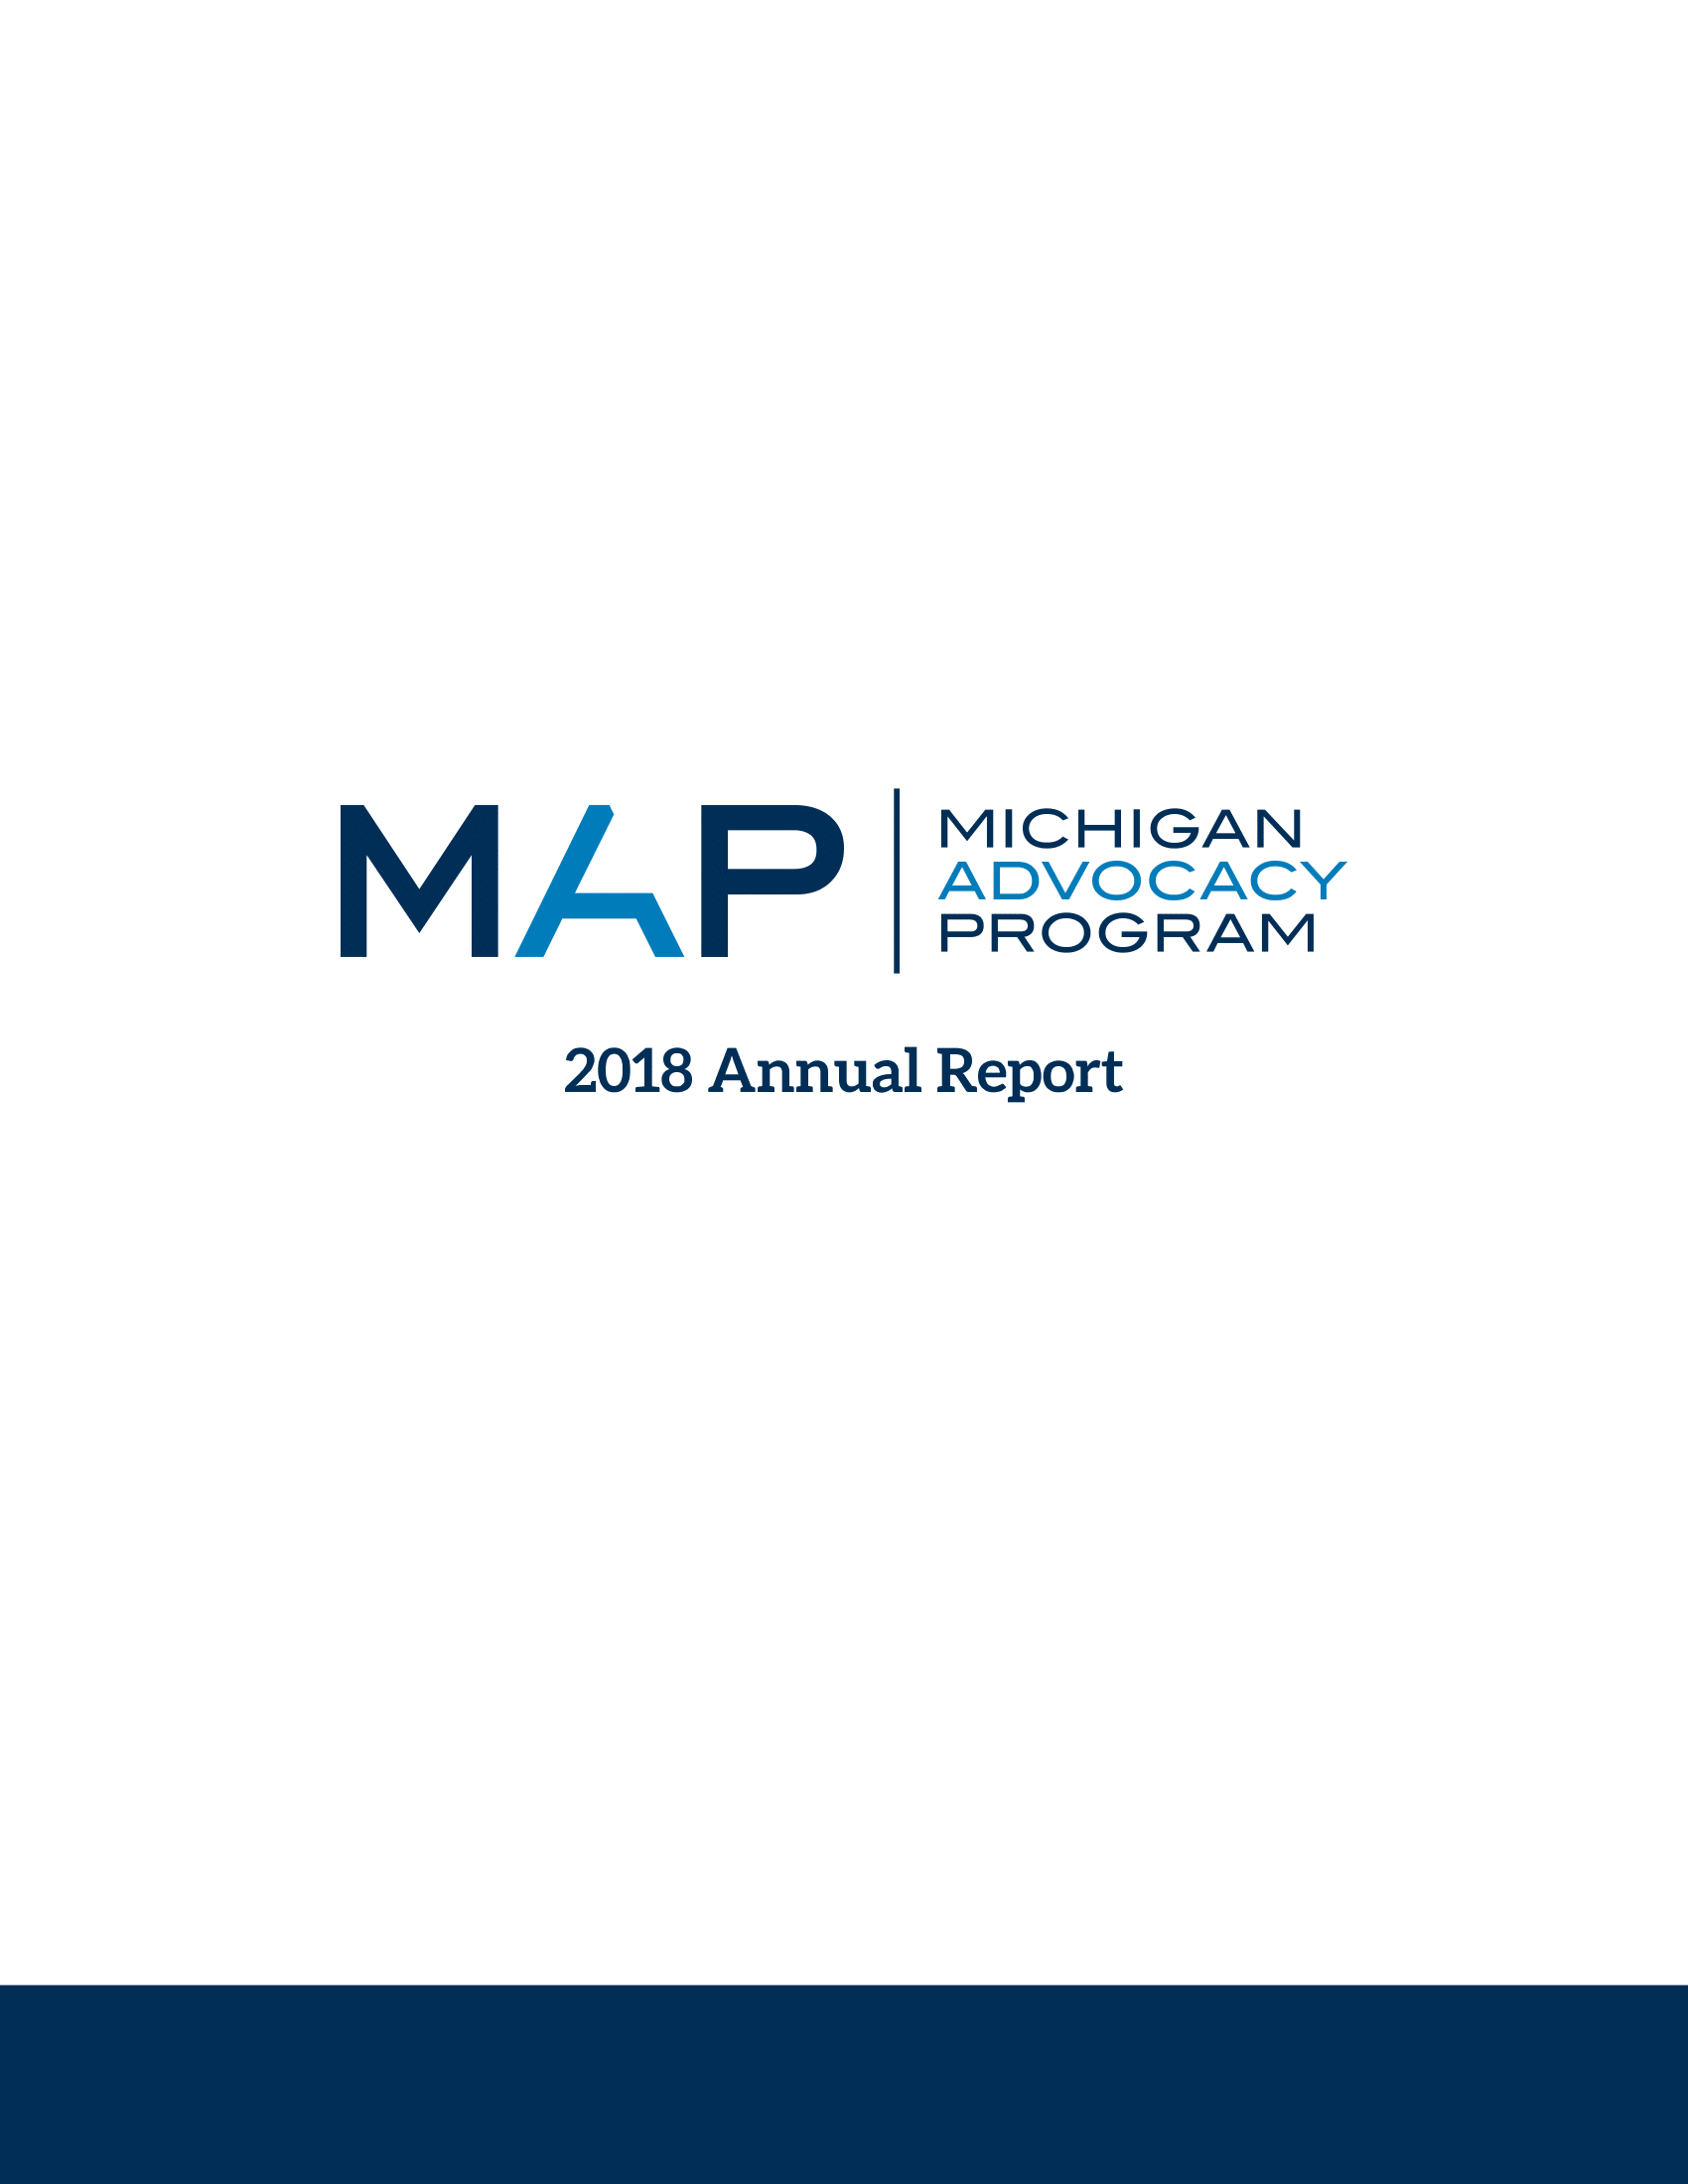 MAP 2018 Annual Report